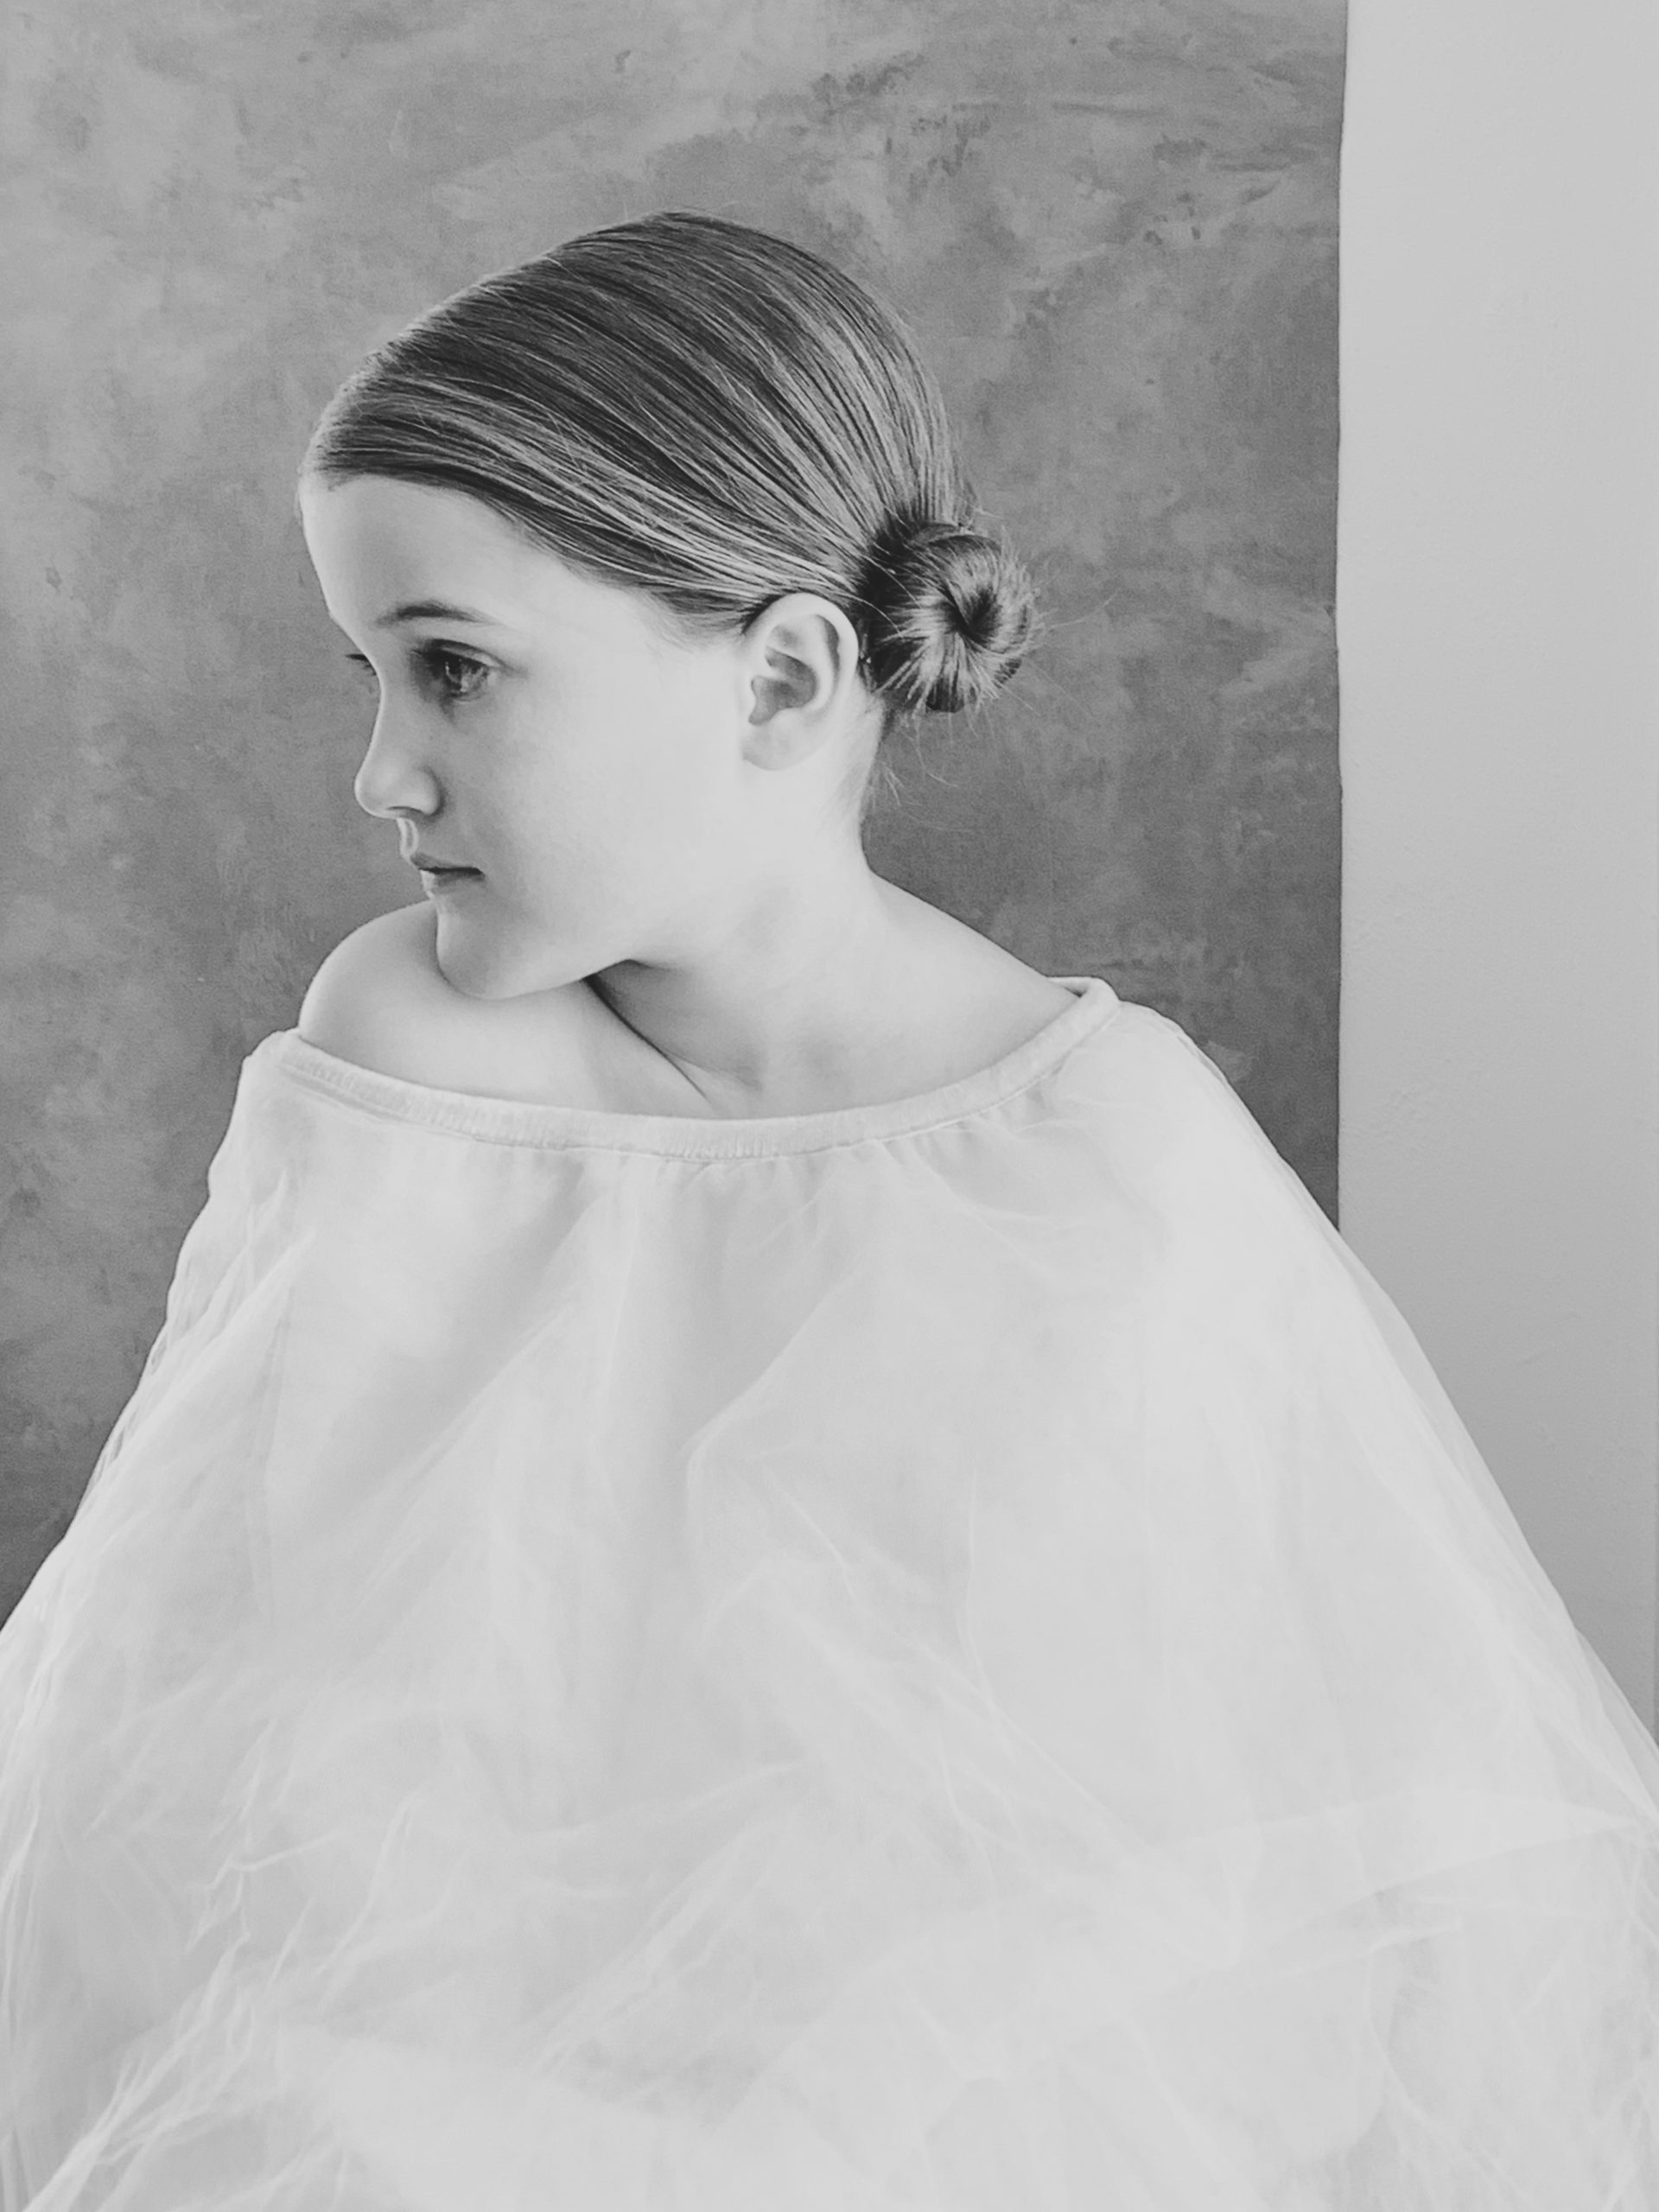 little girl poses for portrait with bun in hair and couture like dress old hollywood black and white photo | iphone photography by Mary Dougherty